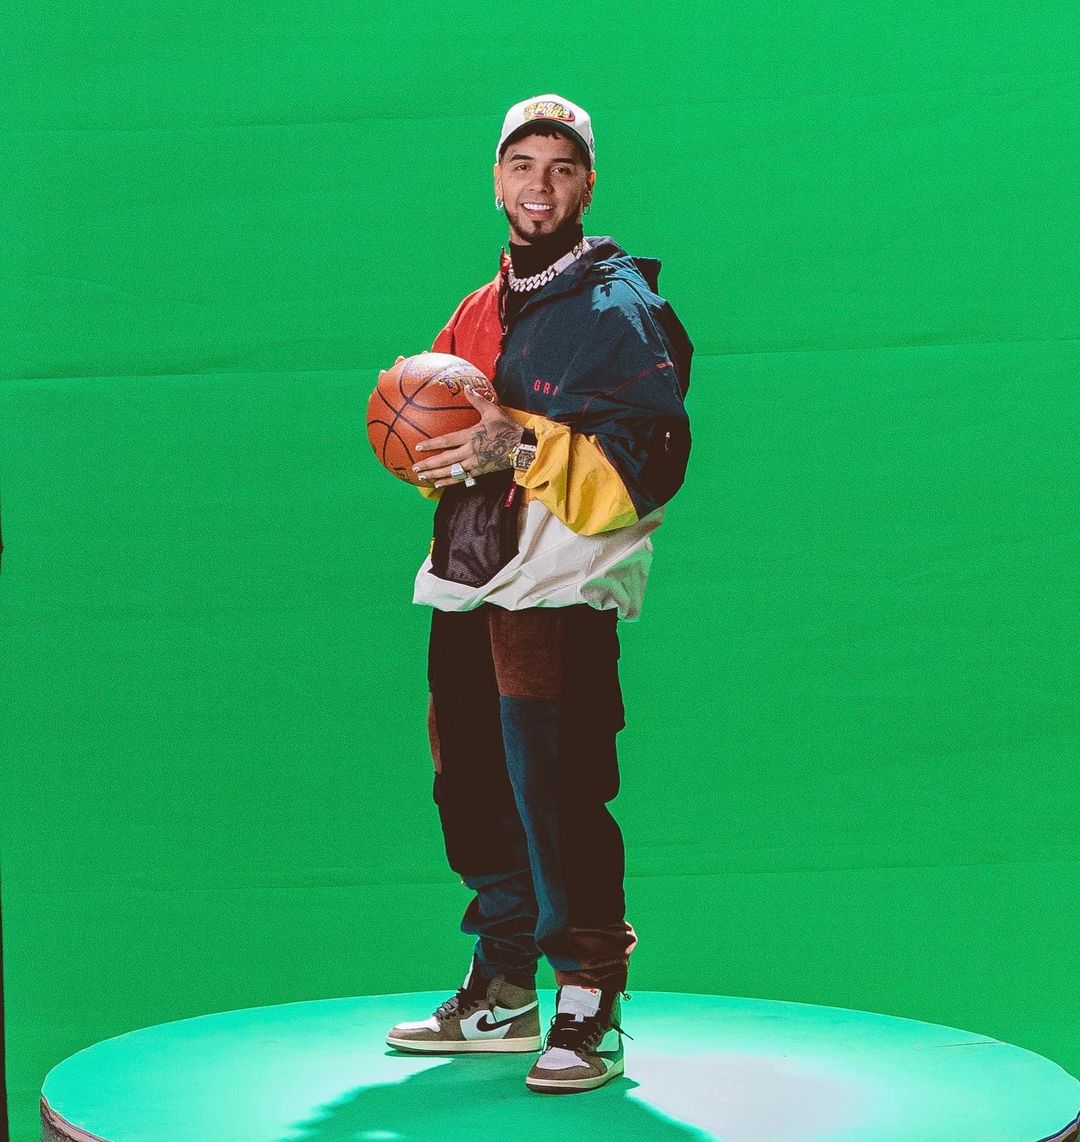 Anuel AA with a basketball in his hand